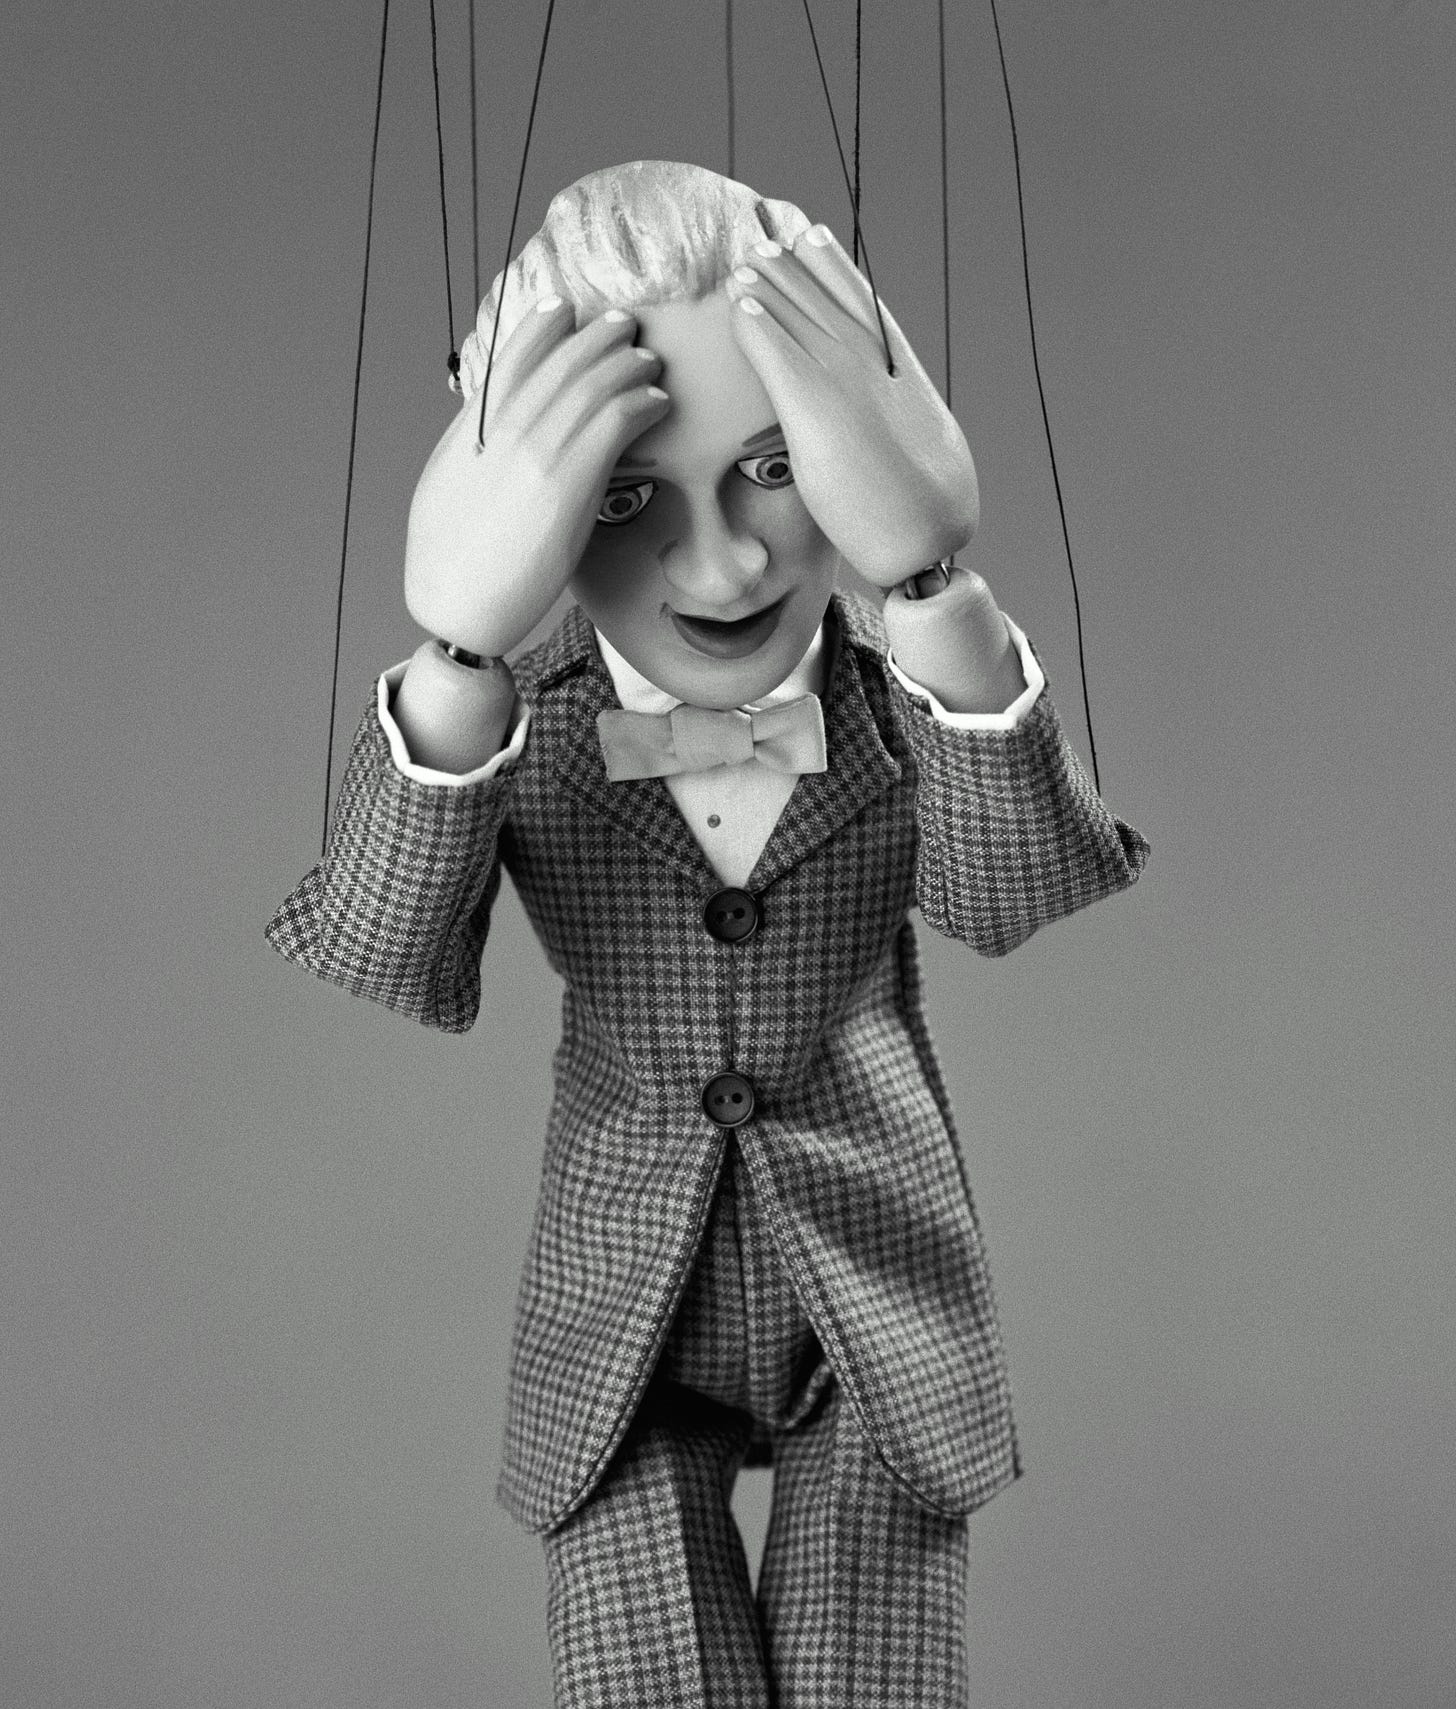 Black and grey image of a male presenting marionette in a checked suit andbow tie who could  plausibly be Rodney dangerfield